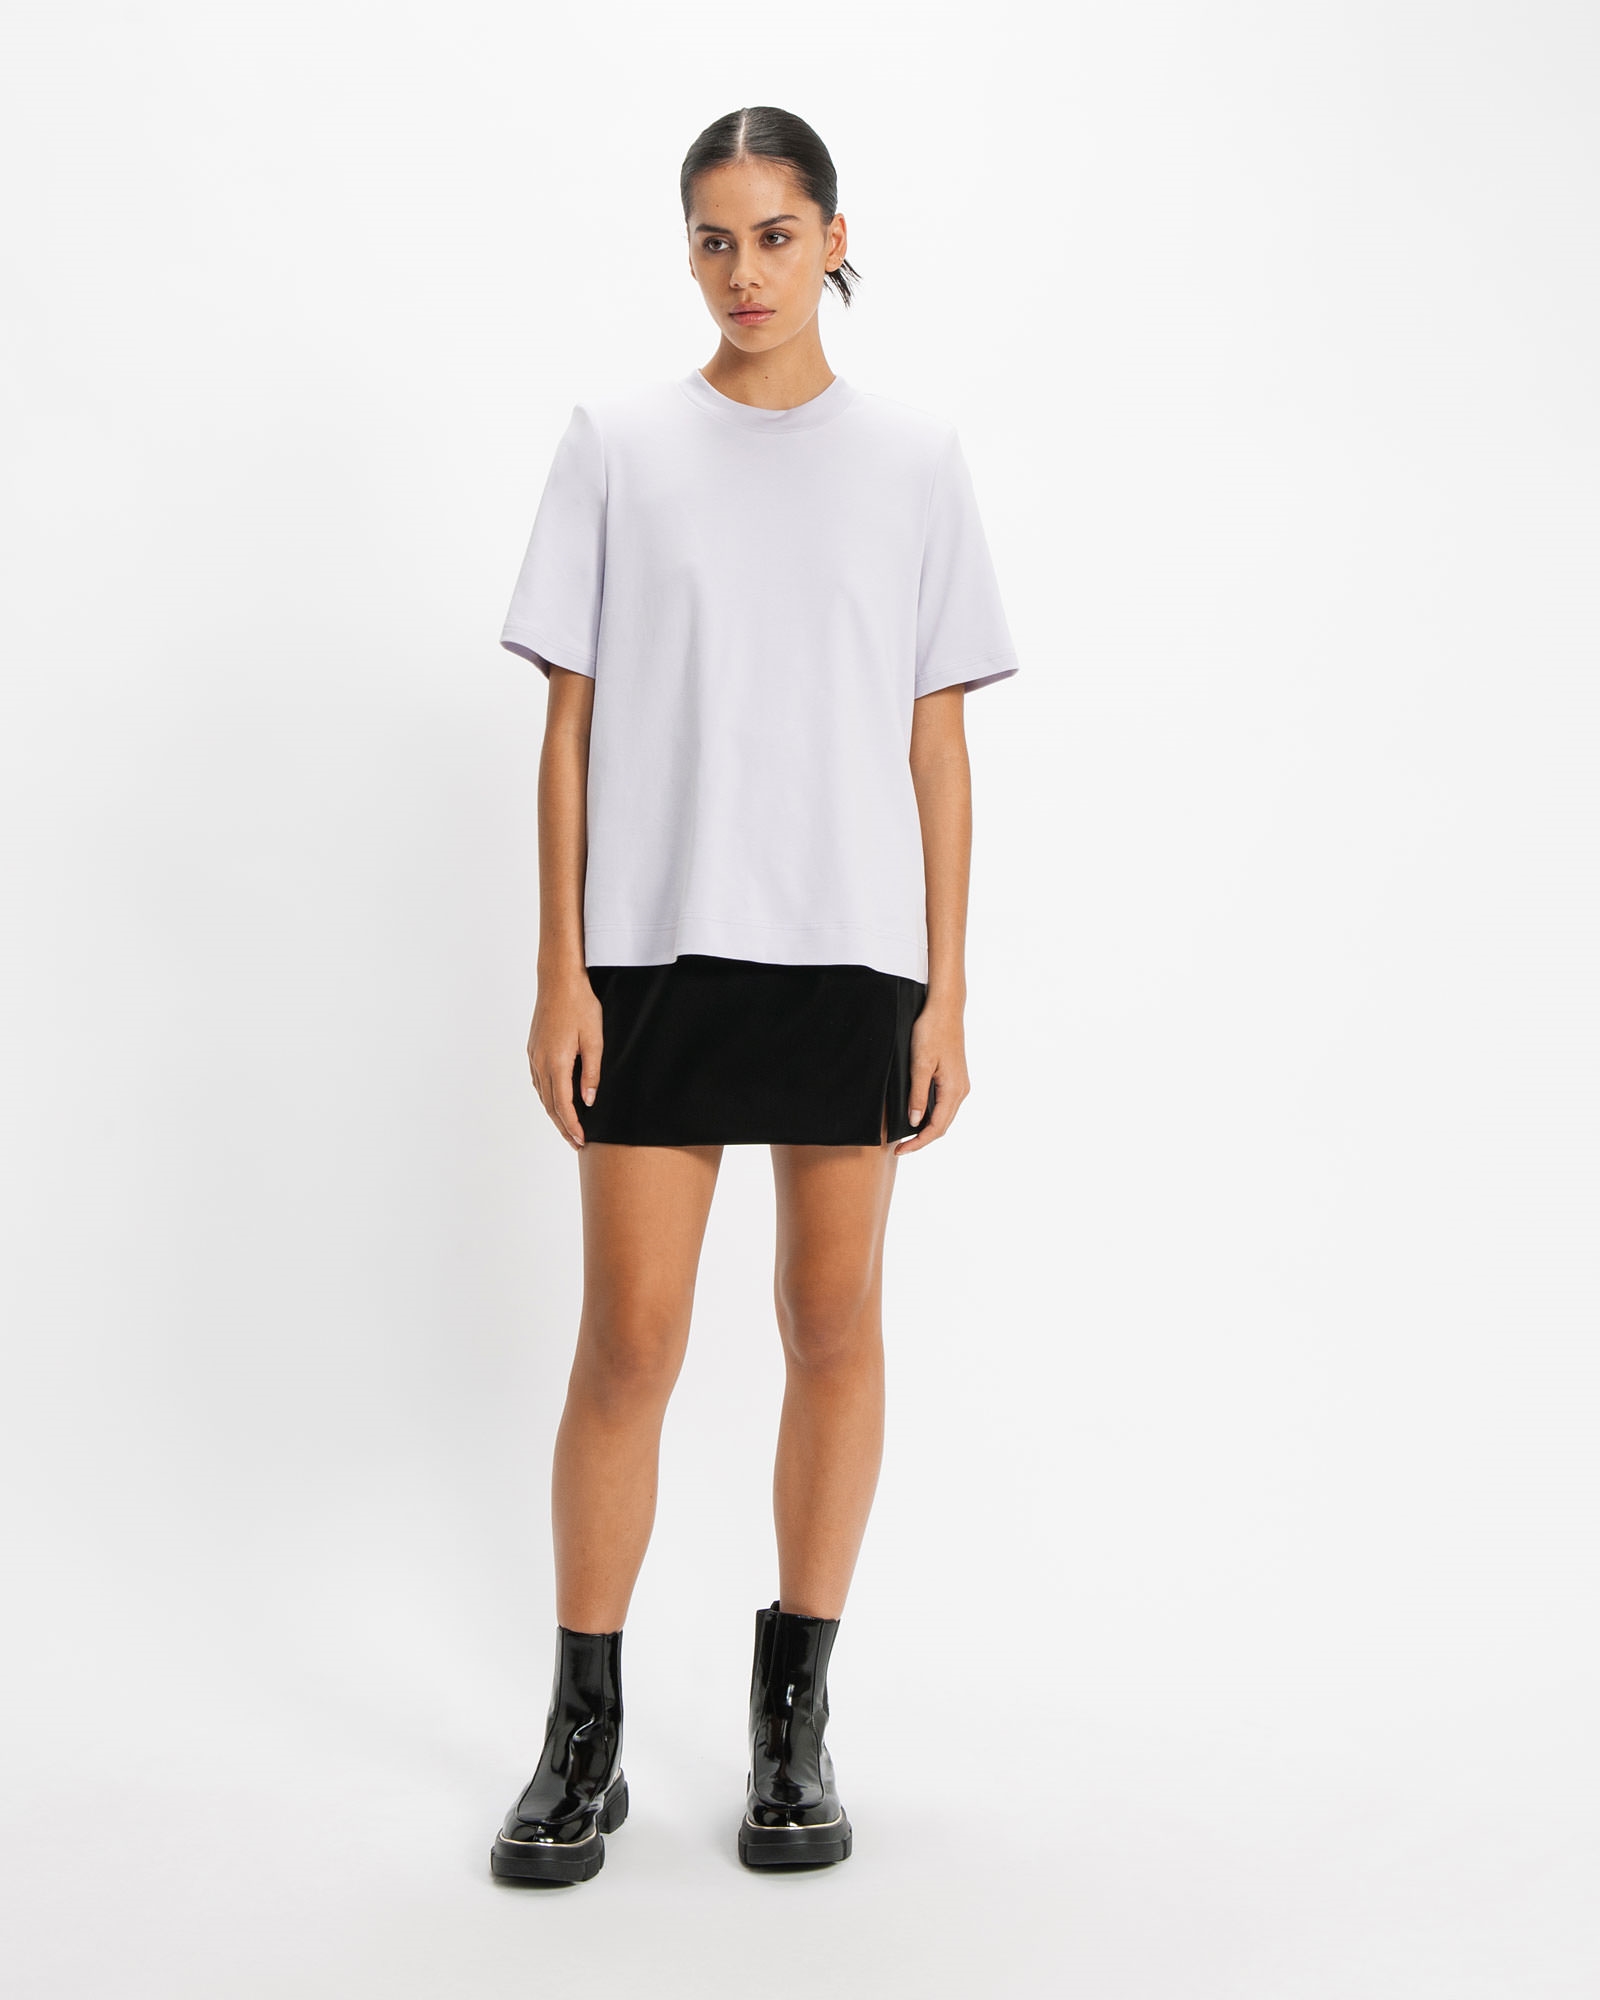 Good Earth Cotton® Structured Tee | Buy Tops and Shirts Online - Cue